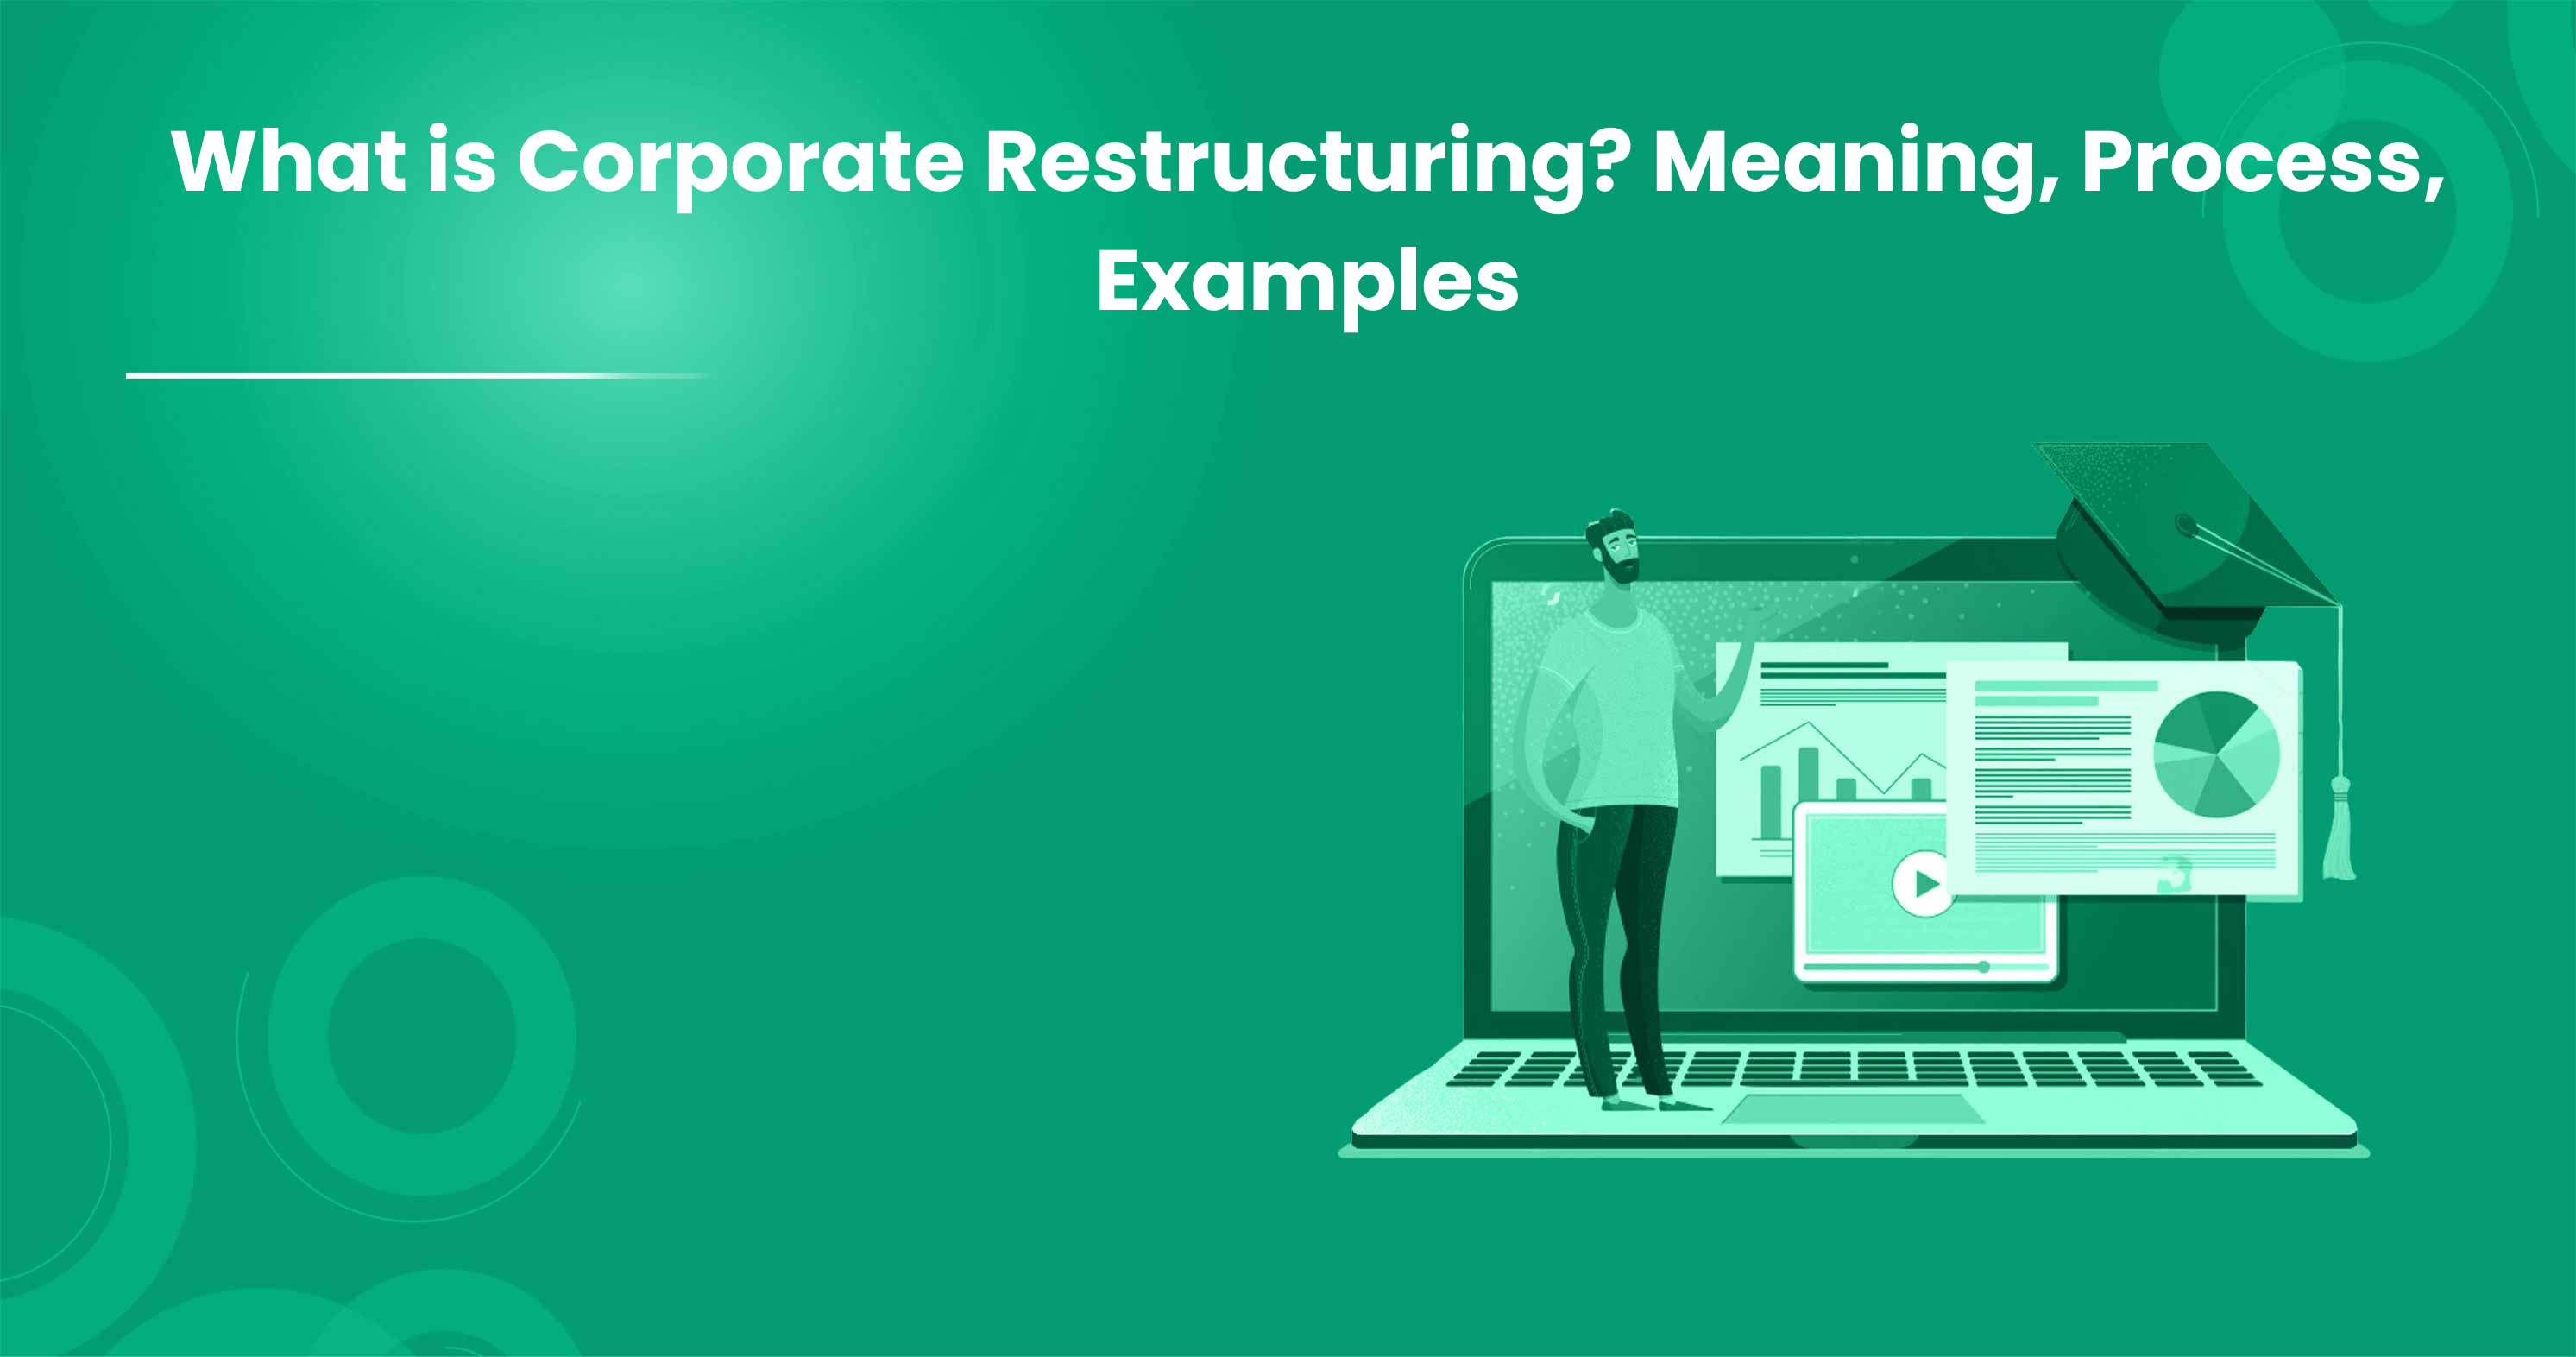 What is Corporate Restructuring? Meaning, Process, Examples